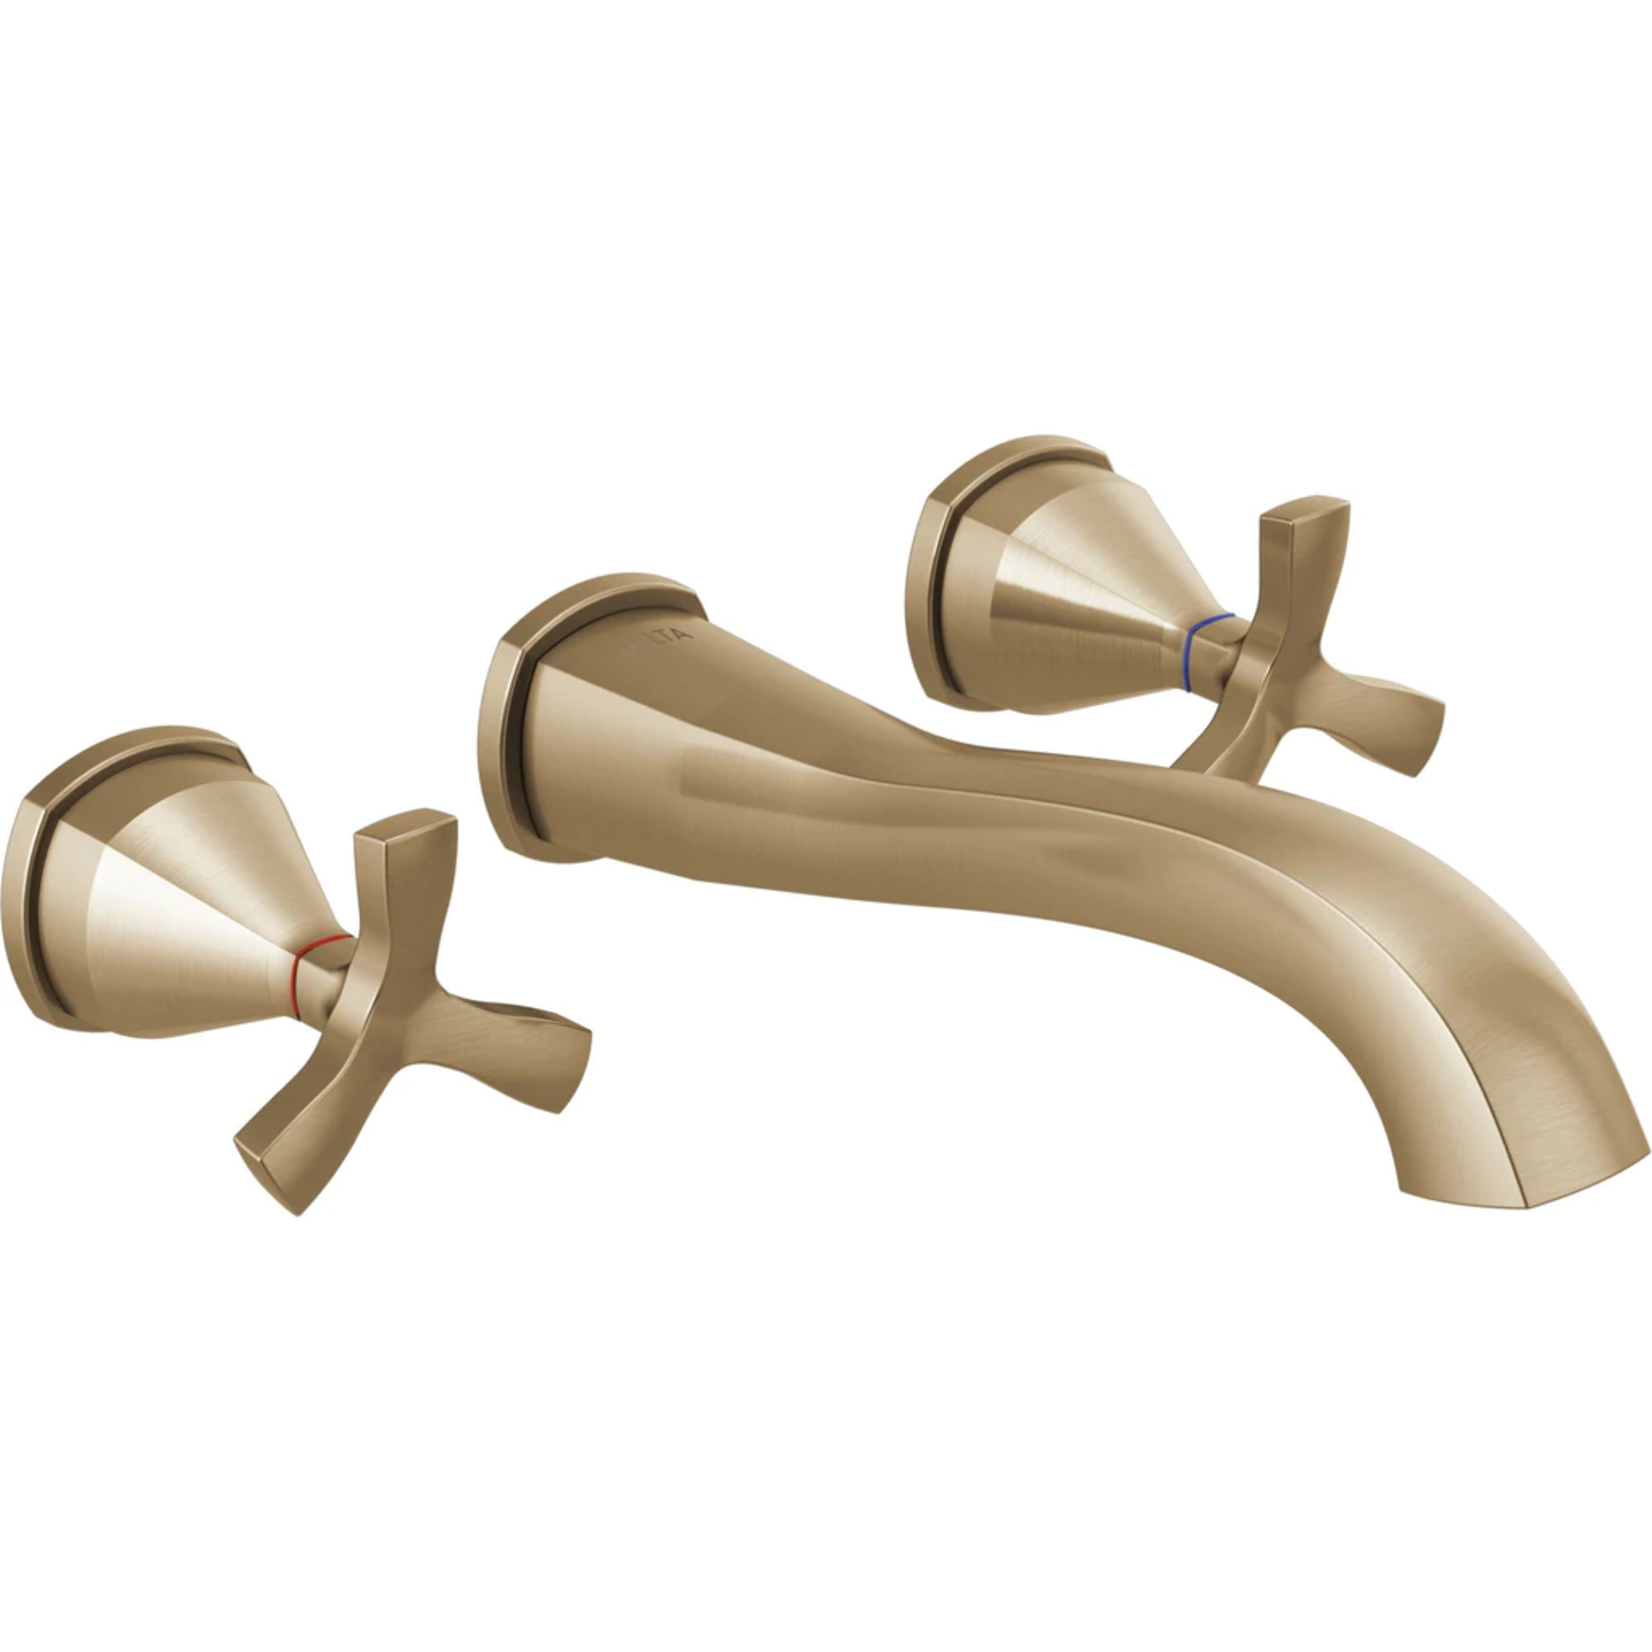 Delta | Stryke Wall Mounted Bathroom Faucet - Champagne Bronze T35766LF-CZWL